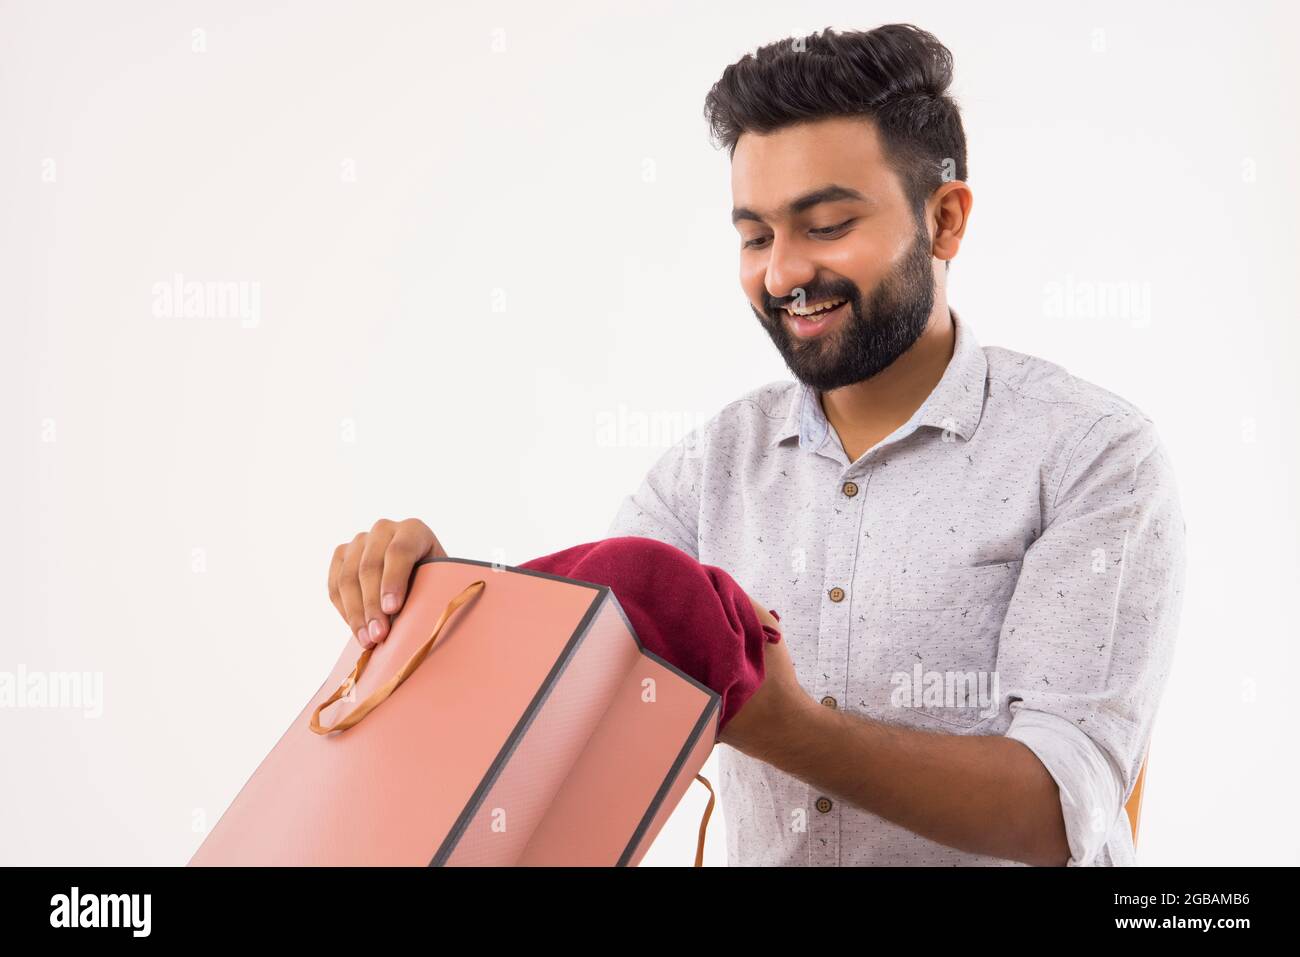 A BEARDED YOUNG MAN LOOKING AT NEWLY PURCHASED CLOTHES Stock Photo